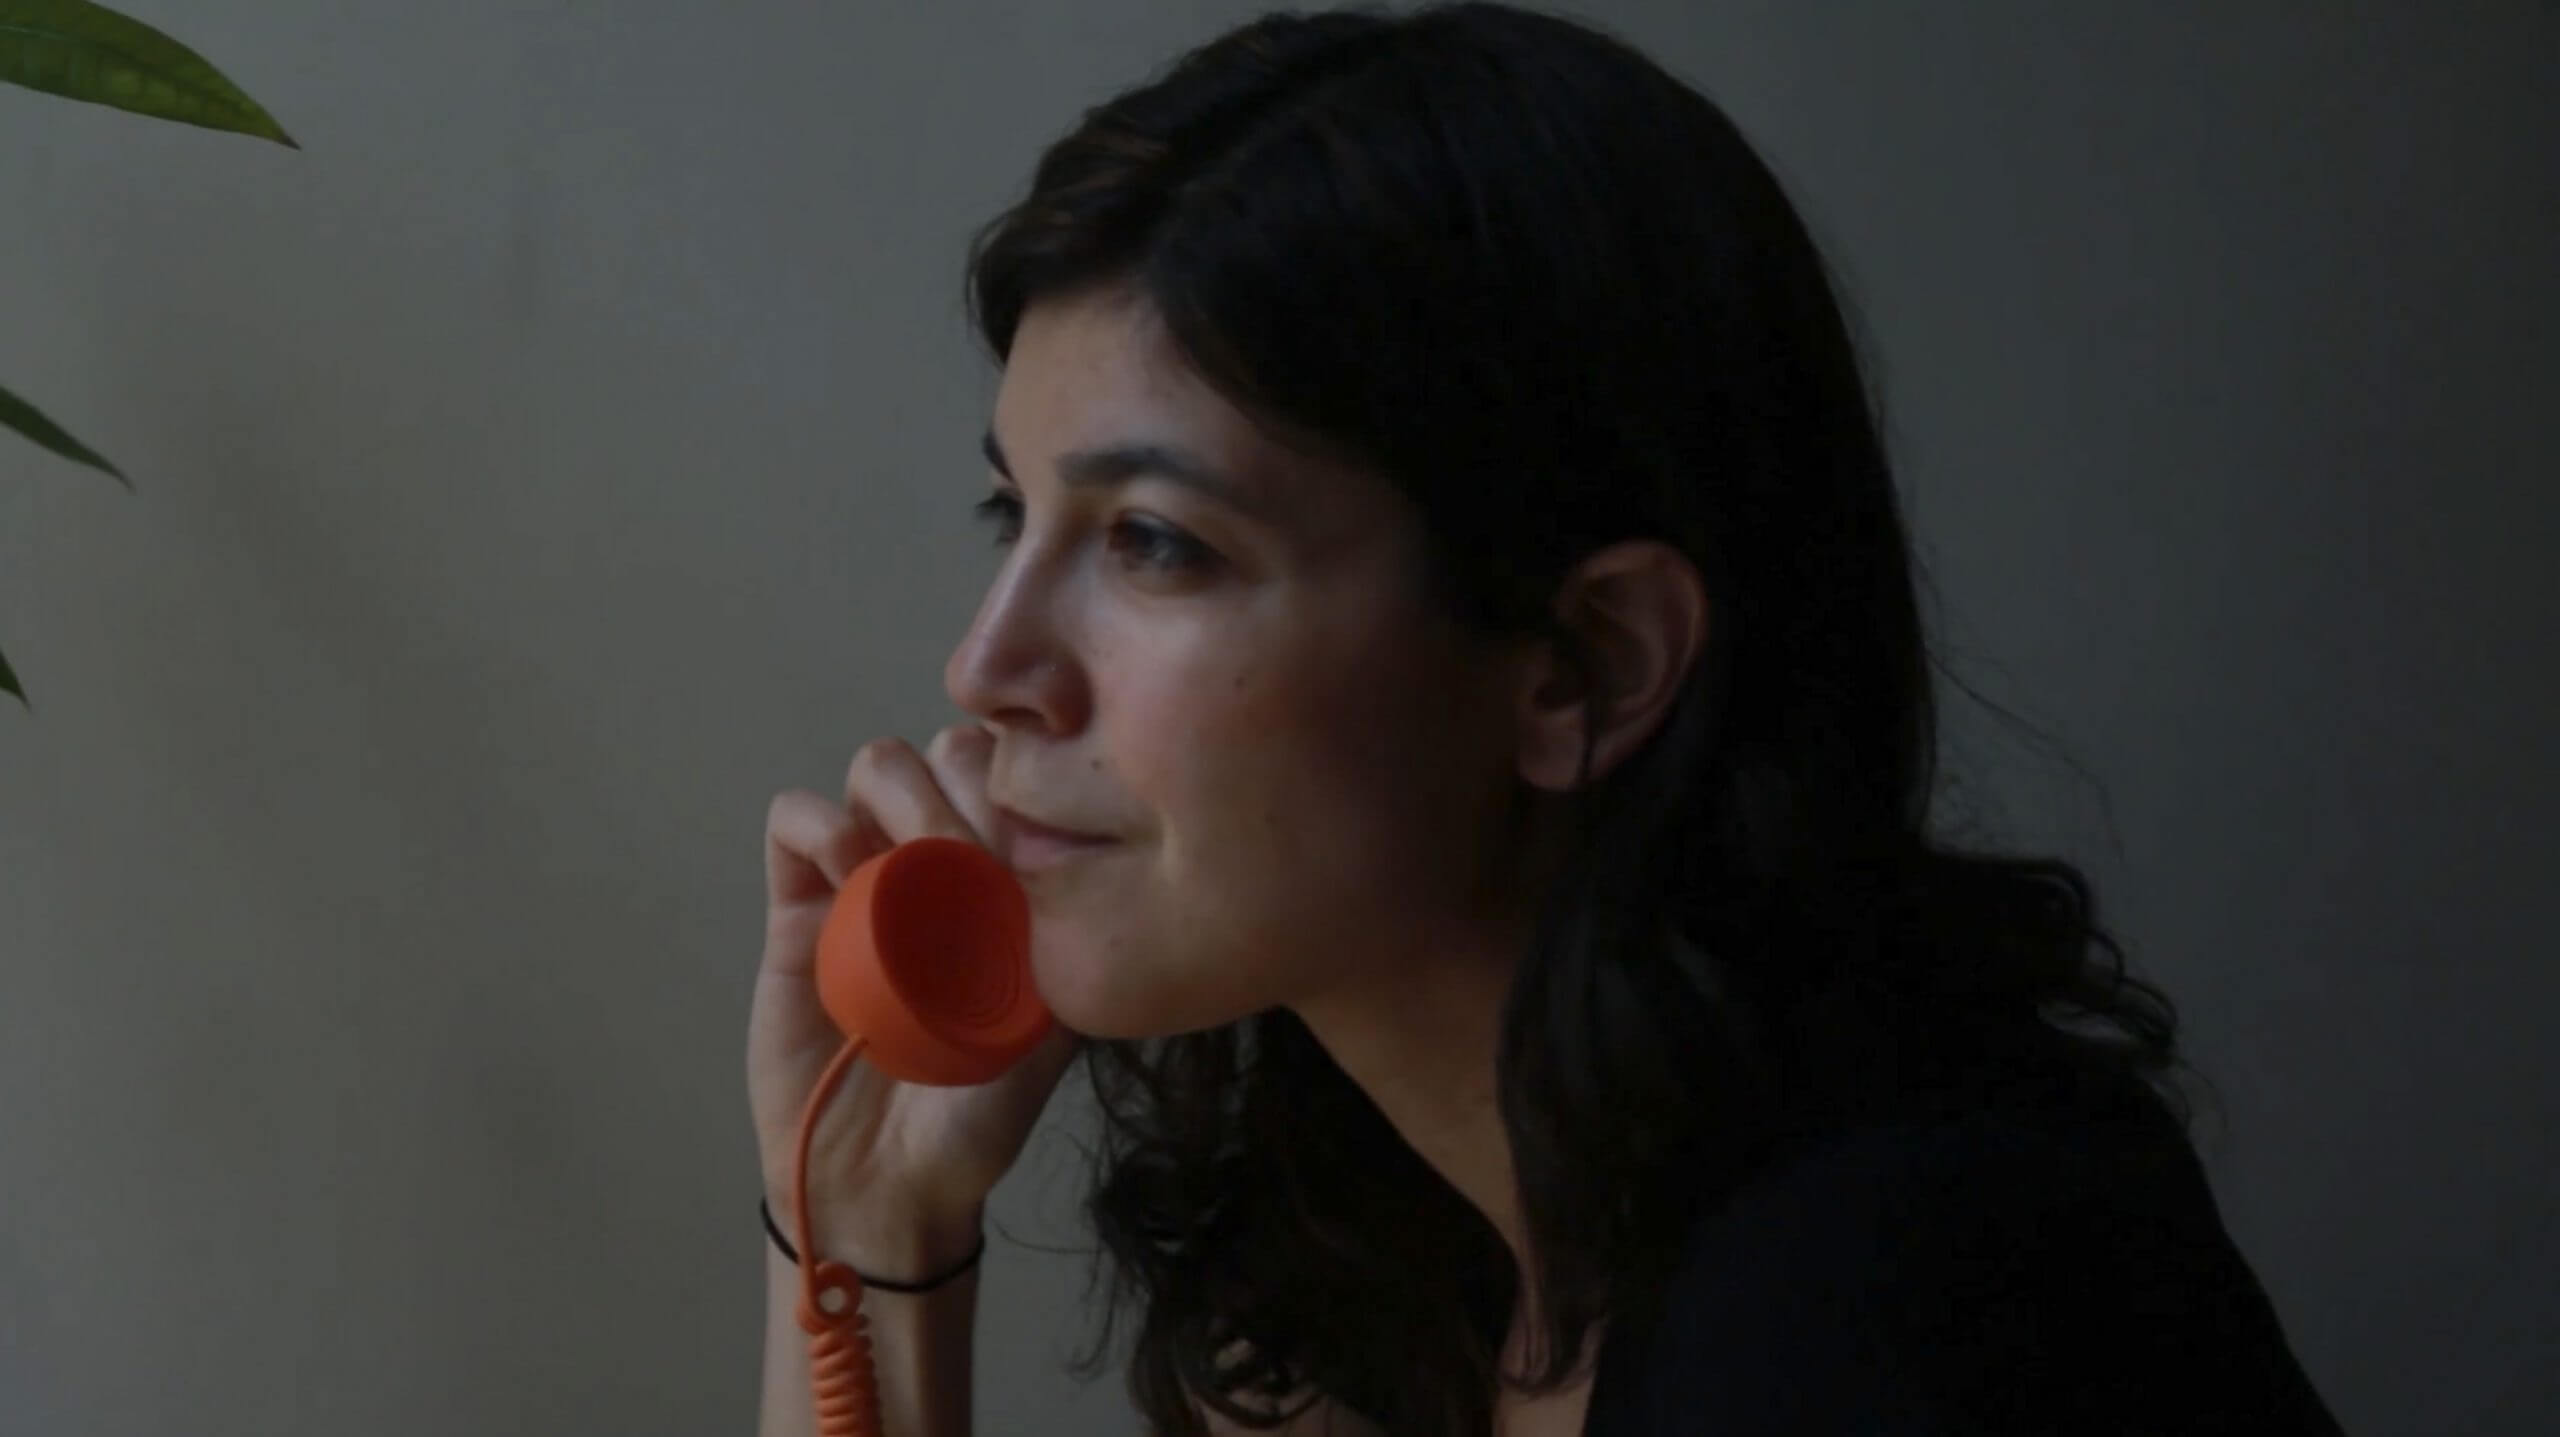 Still from A Photographic Memory. Profile shot of Rachel Elizabeth Seed with an orange corded phone on her ear.